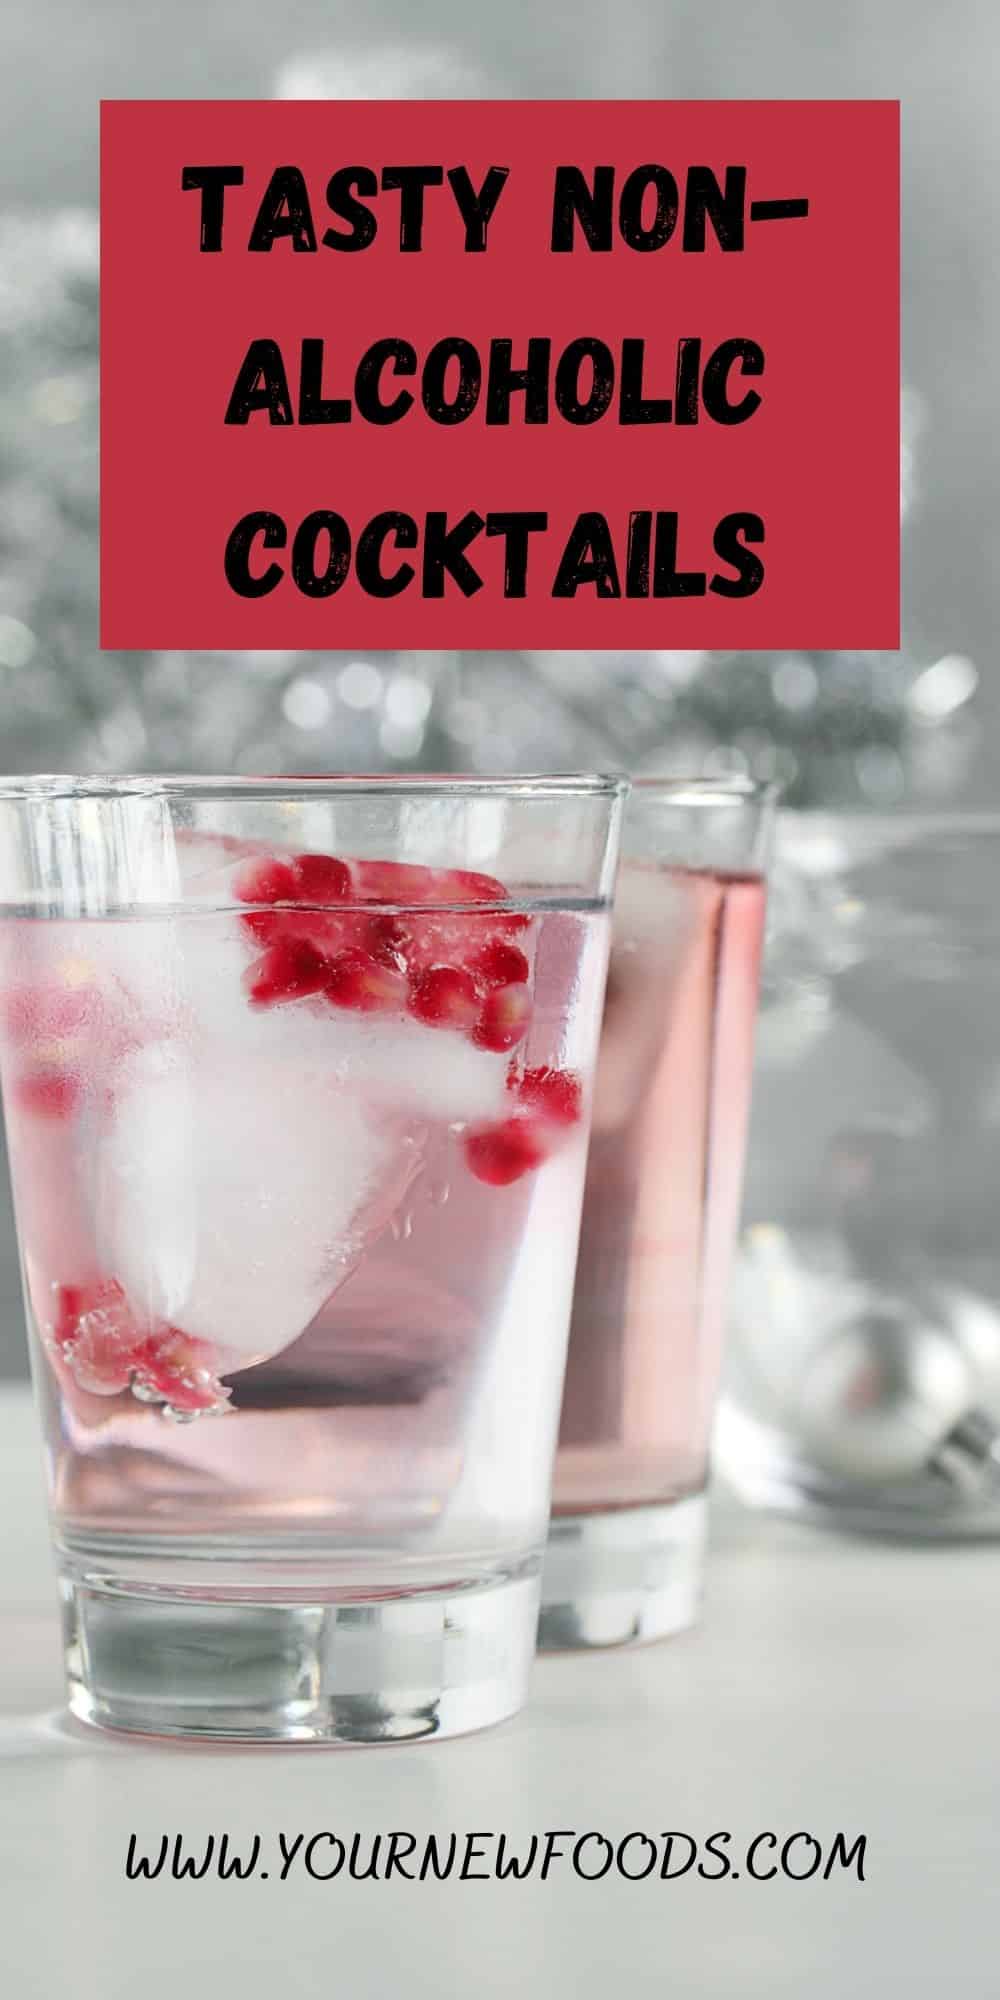 two non-alcoholic clear cocktails in tubmlers with a large ice cube and floating red berries